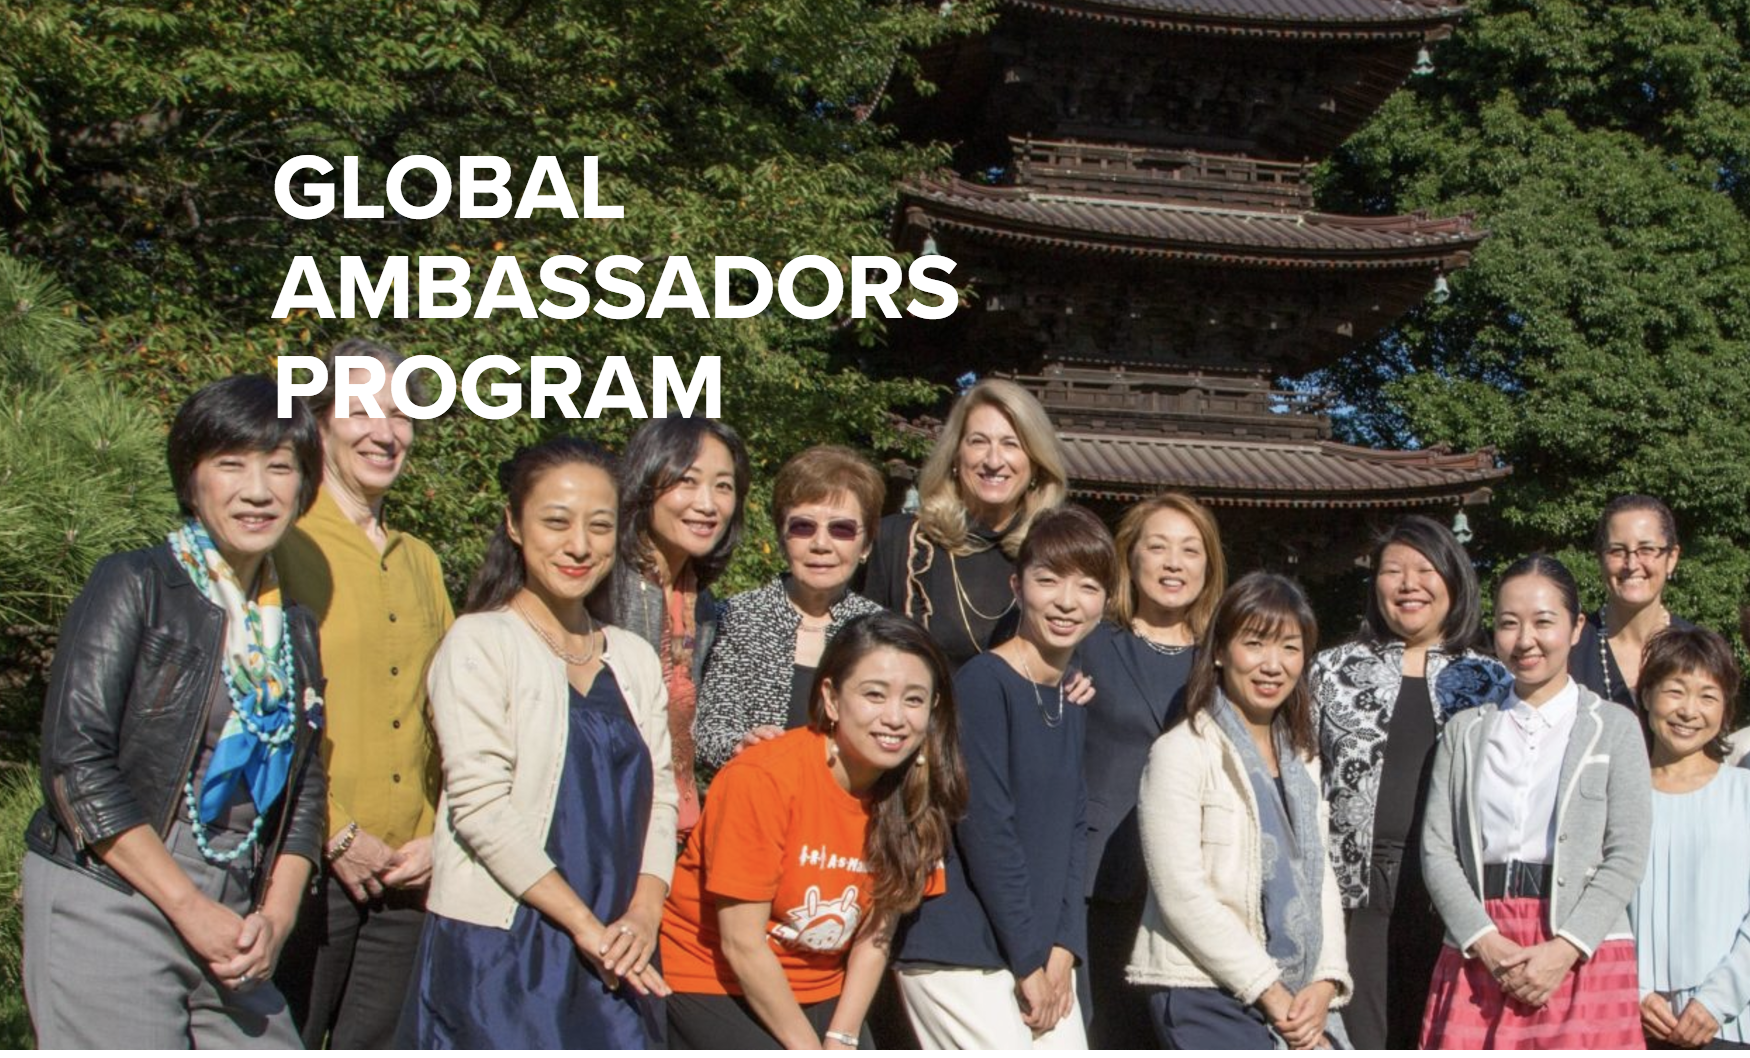 Vital Voices/Bank of America’s Global Ambassadors Program 2017 in Los Angeles, California (fully-funded)